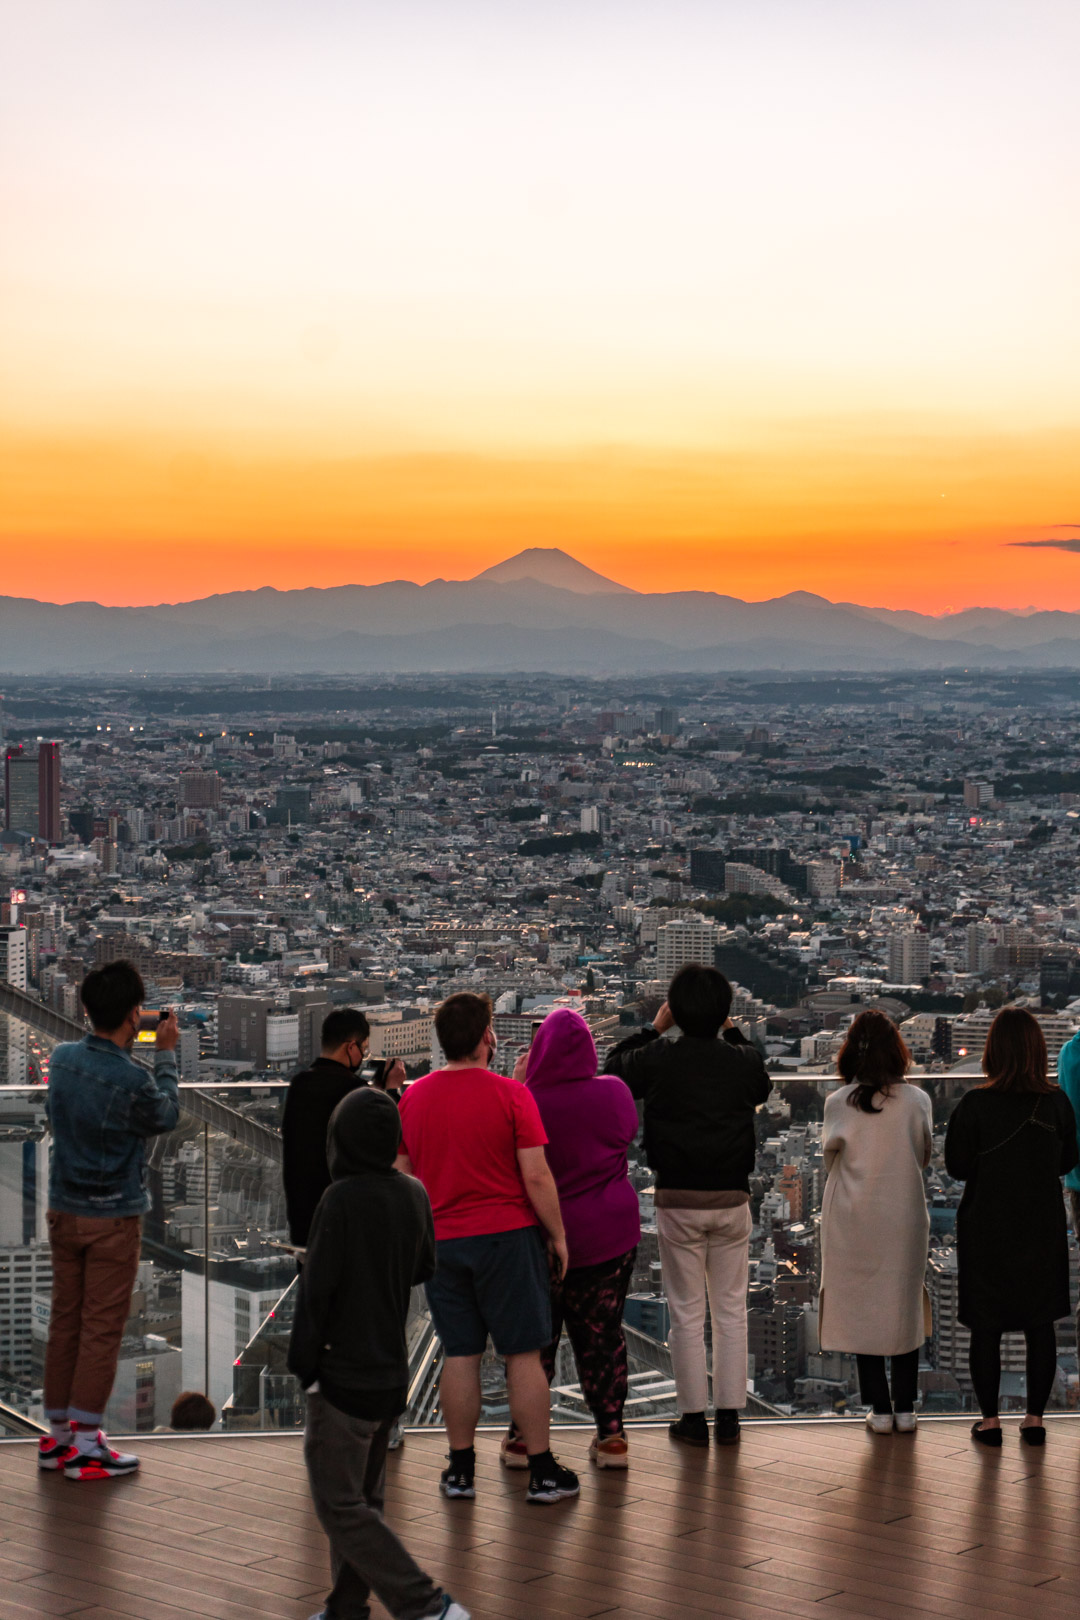 Shibuya Sky: Tokyo's Most Amazing Rooftop Observation Deck